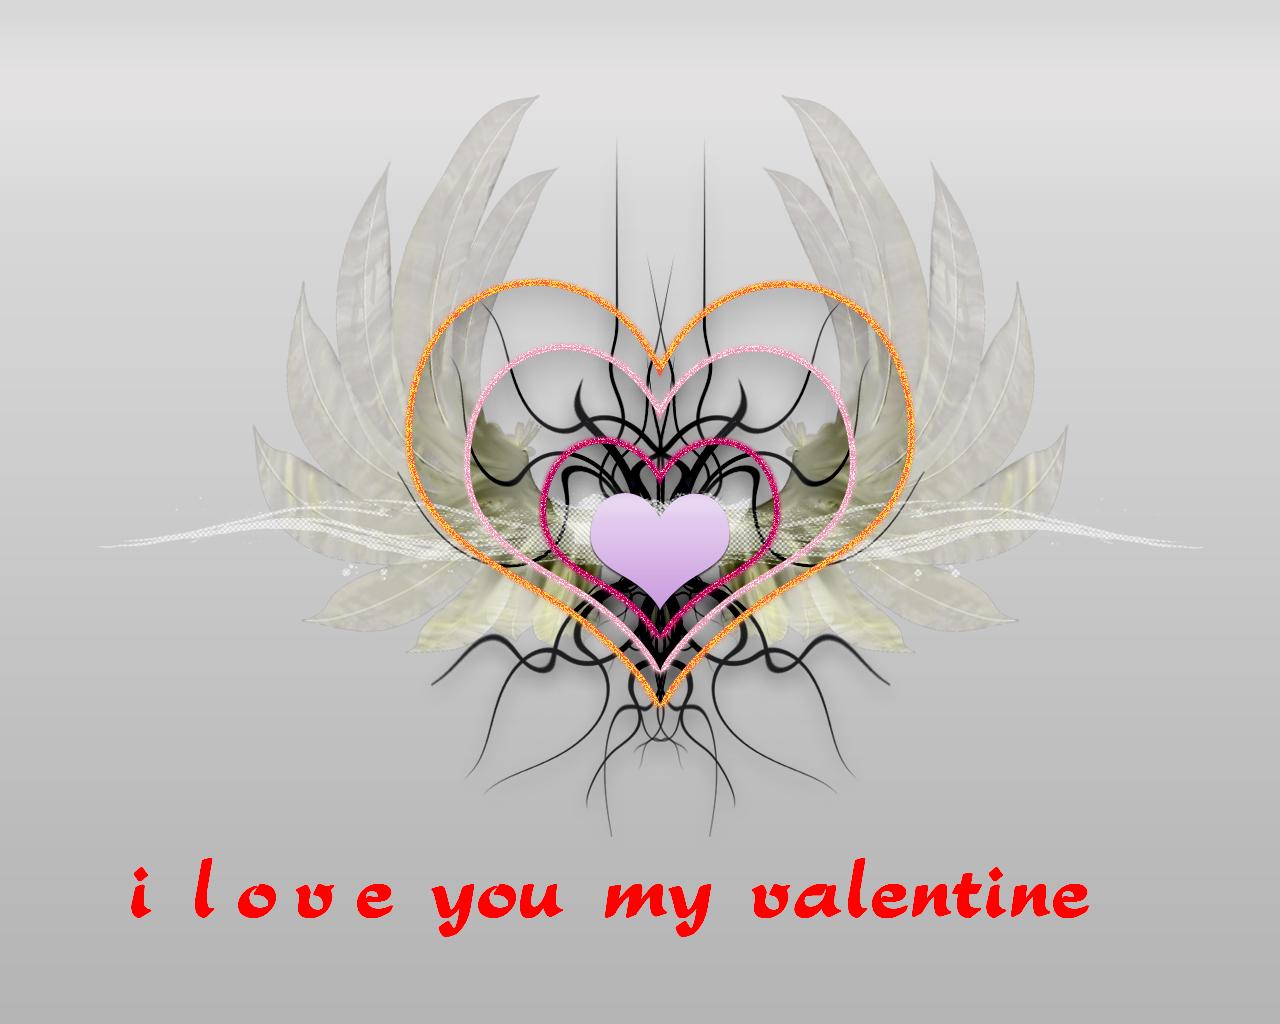 Excellent HD Quality of Image Sharing: happy valentines day 14 feb 2013 valentine day HD wallpaper free download 1080p with text